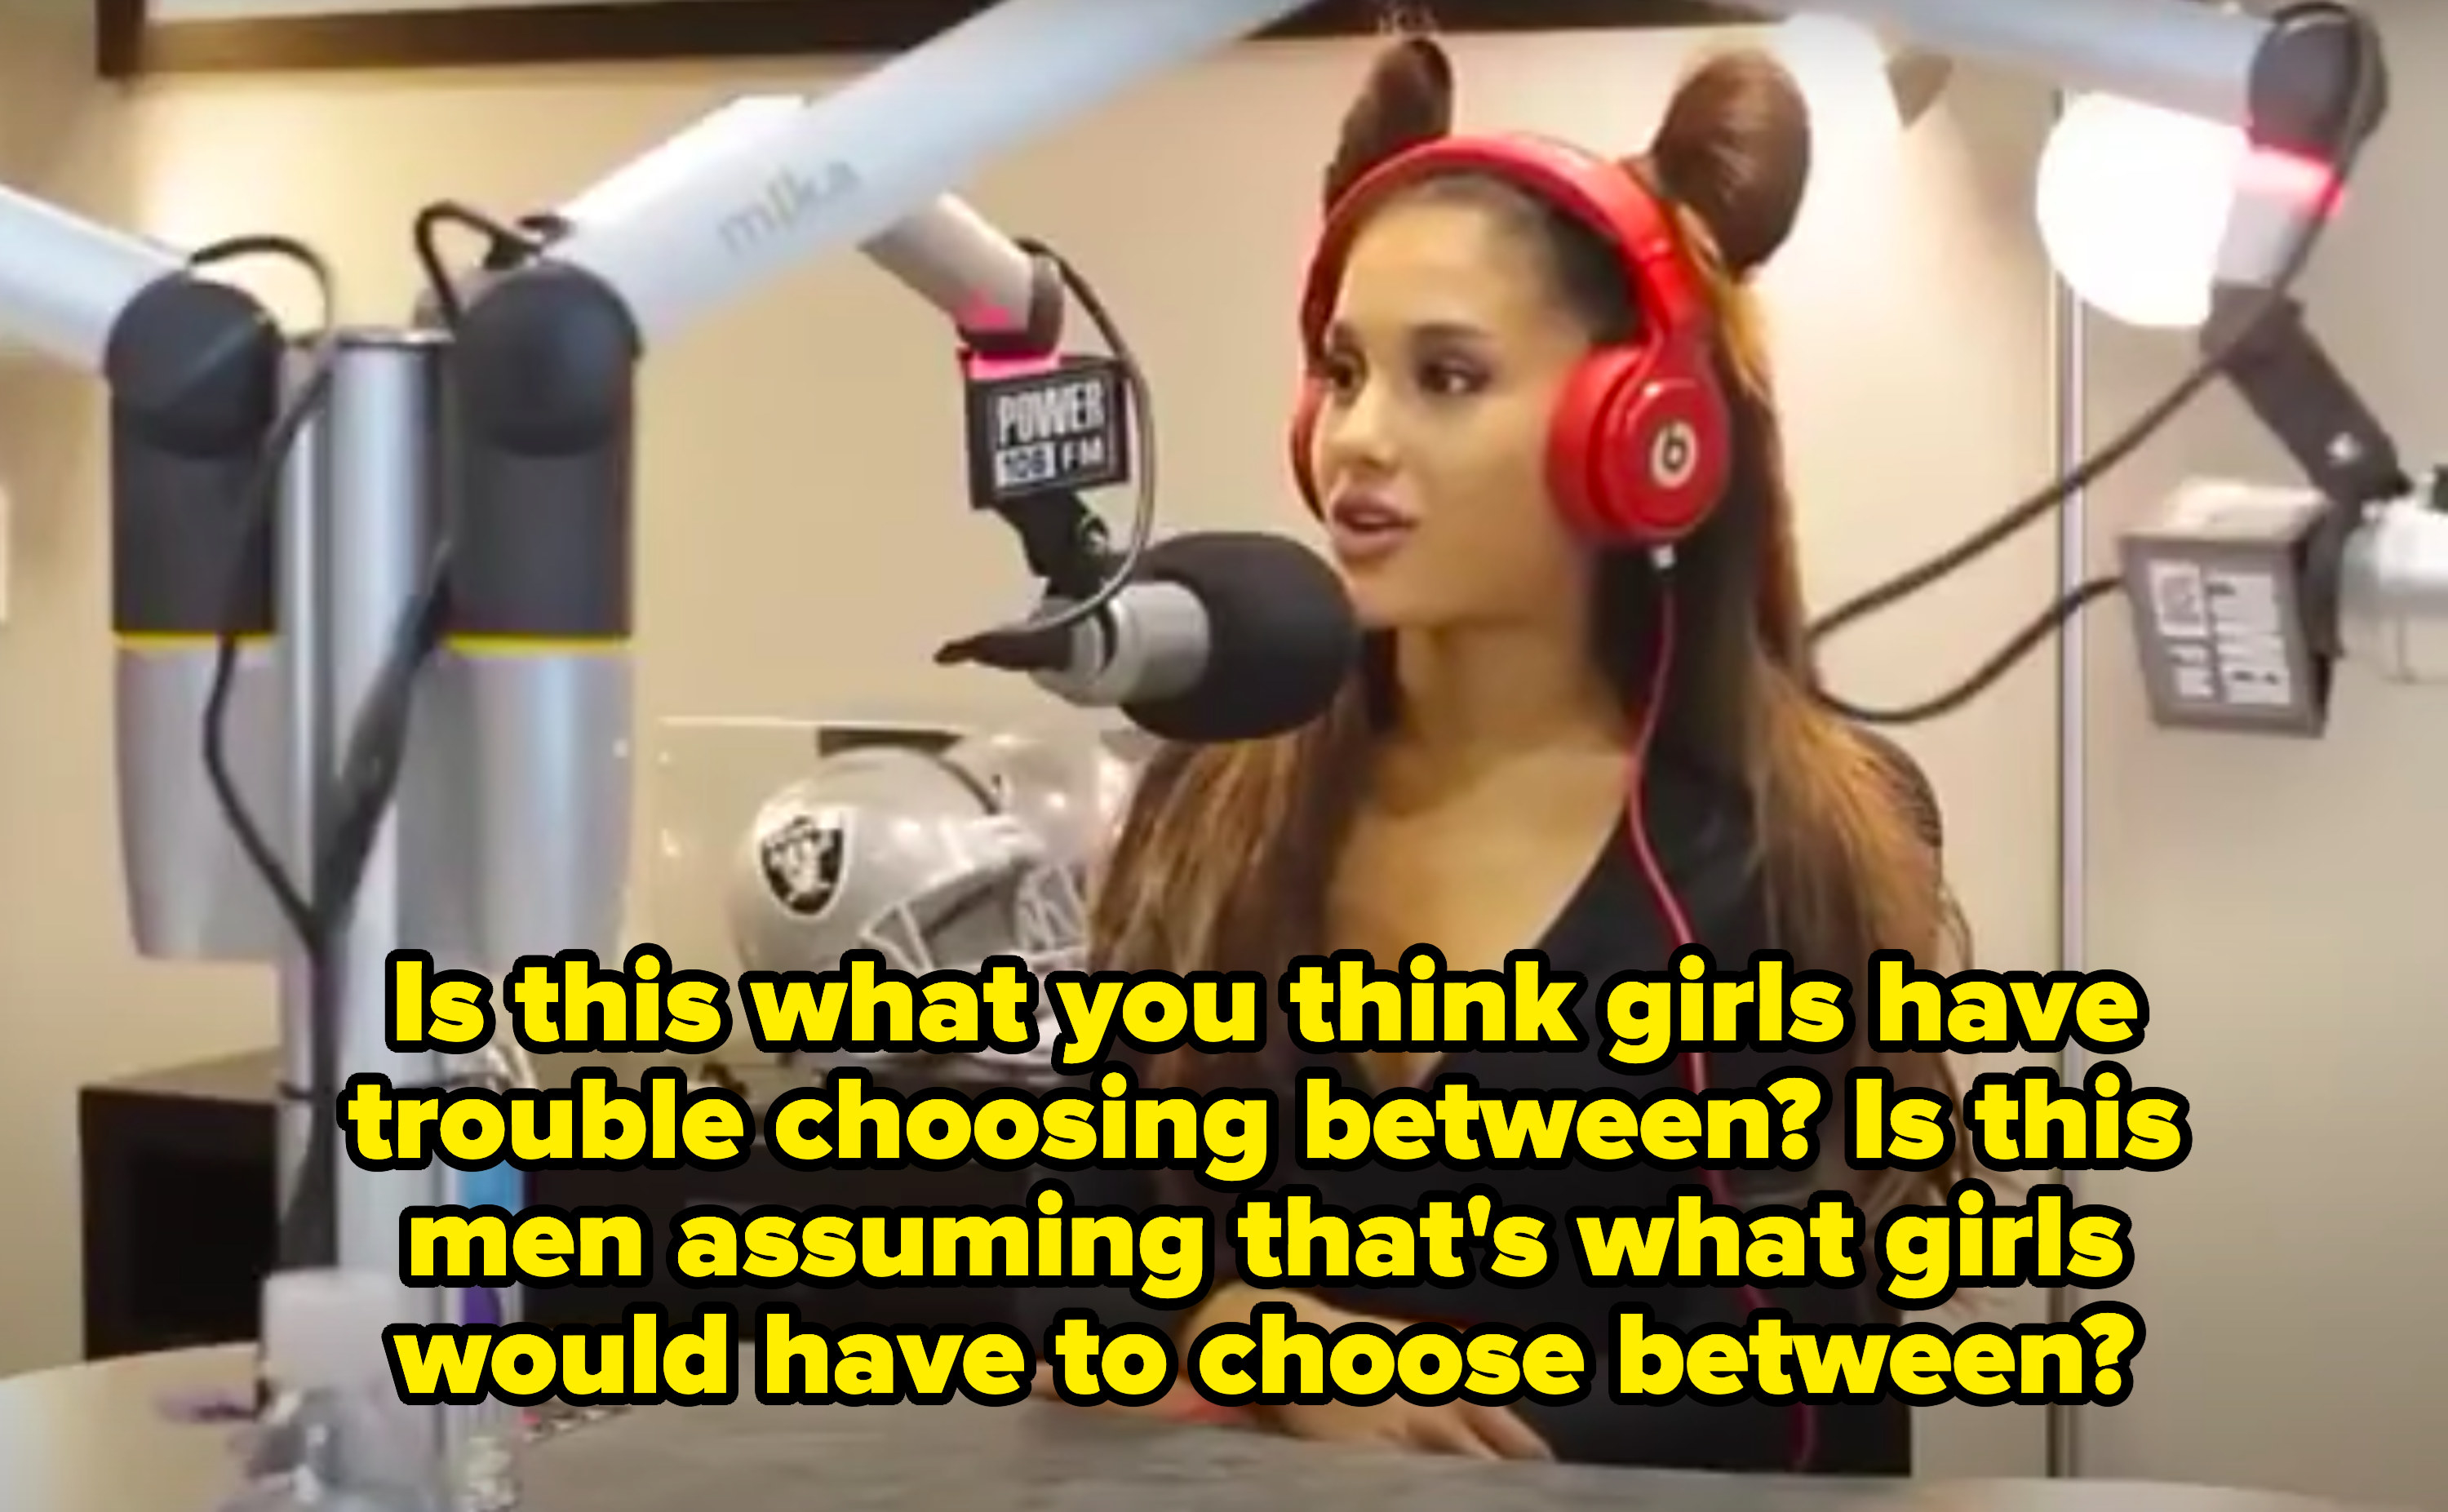 Ariana saying &quot;Is this what you think girls have trouble choosing between? Is this men assuming that&#x27;s what girls would have to choose between?&quot;